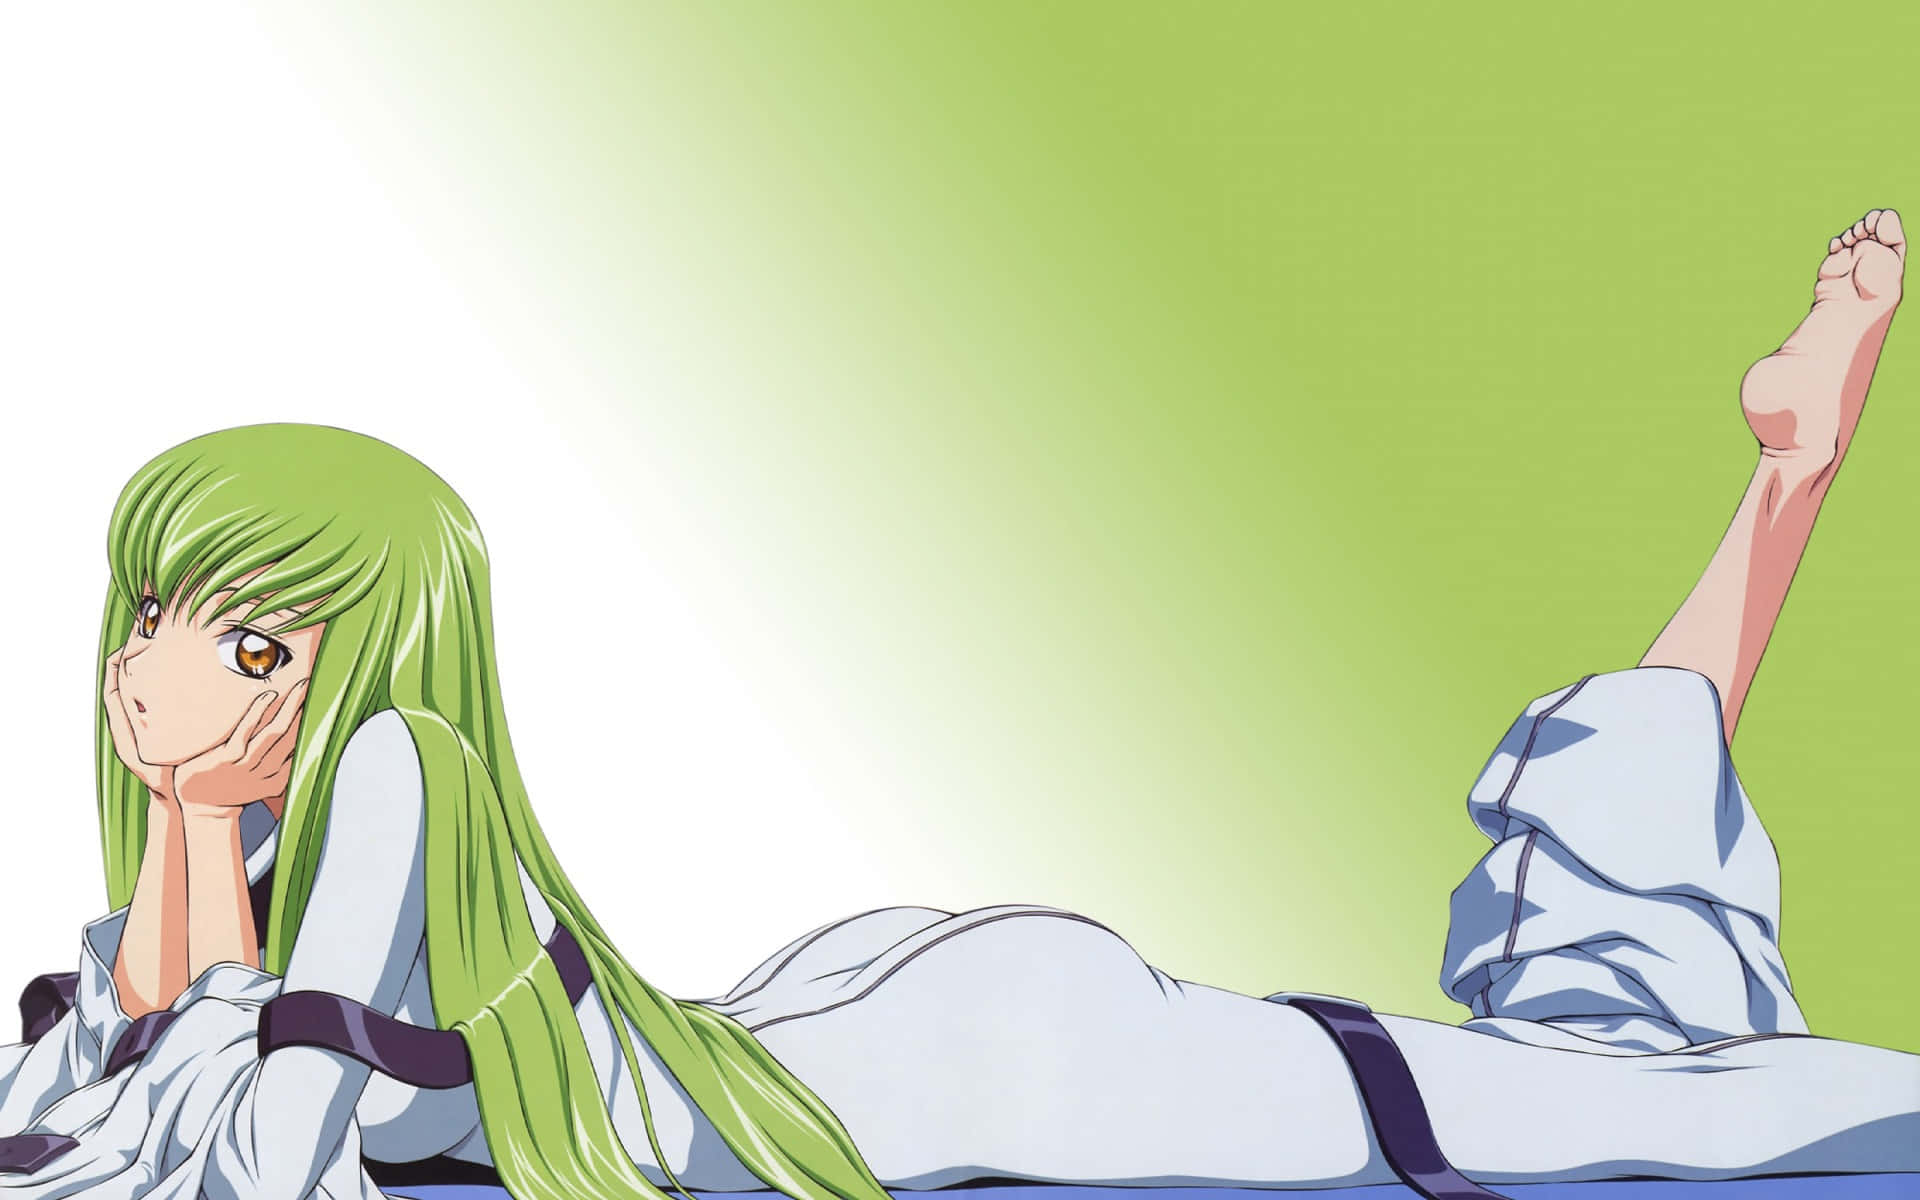 A Girl With Long Green Hair Laying On The Ground